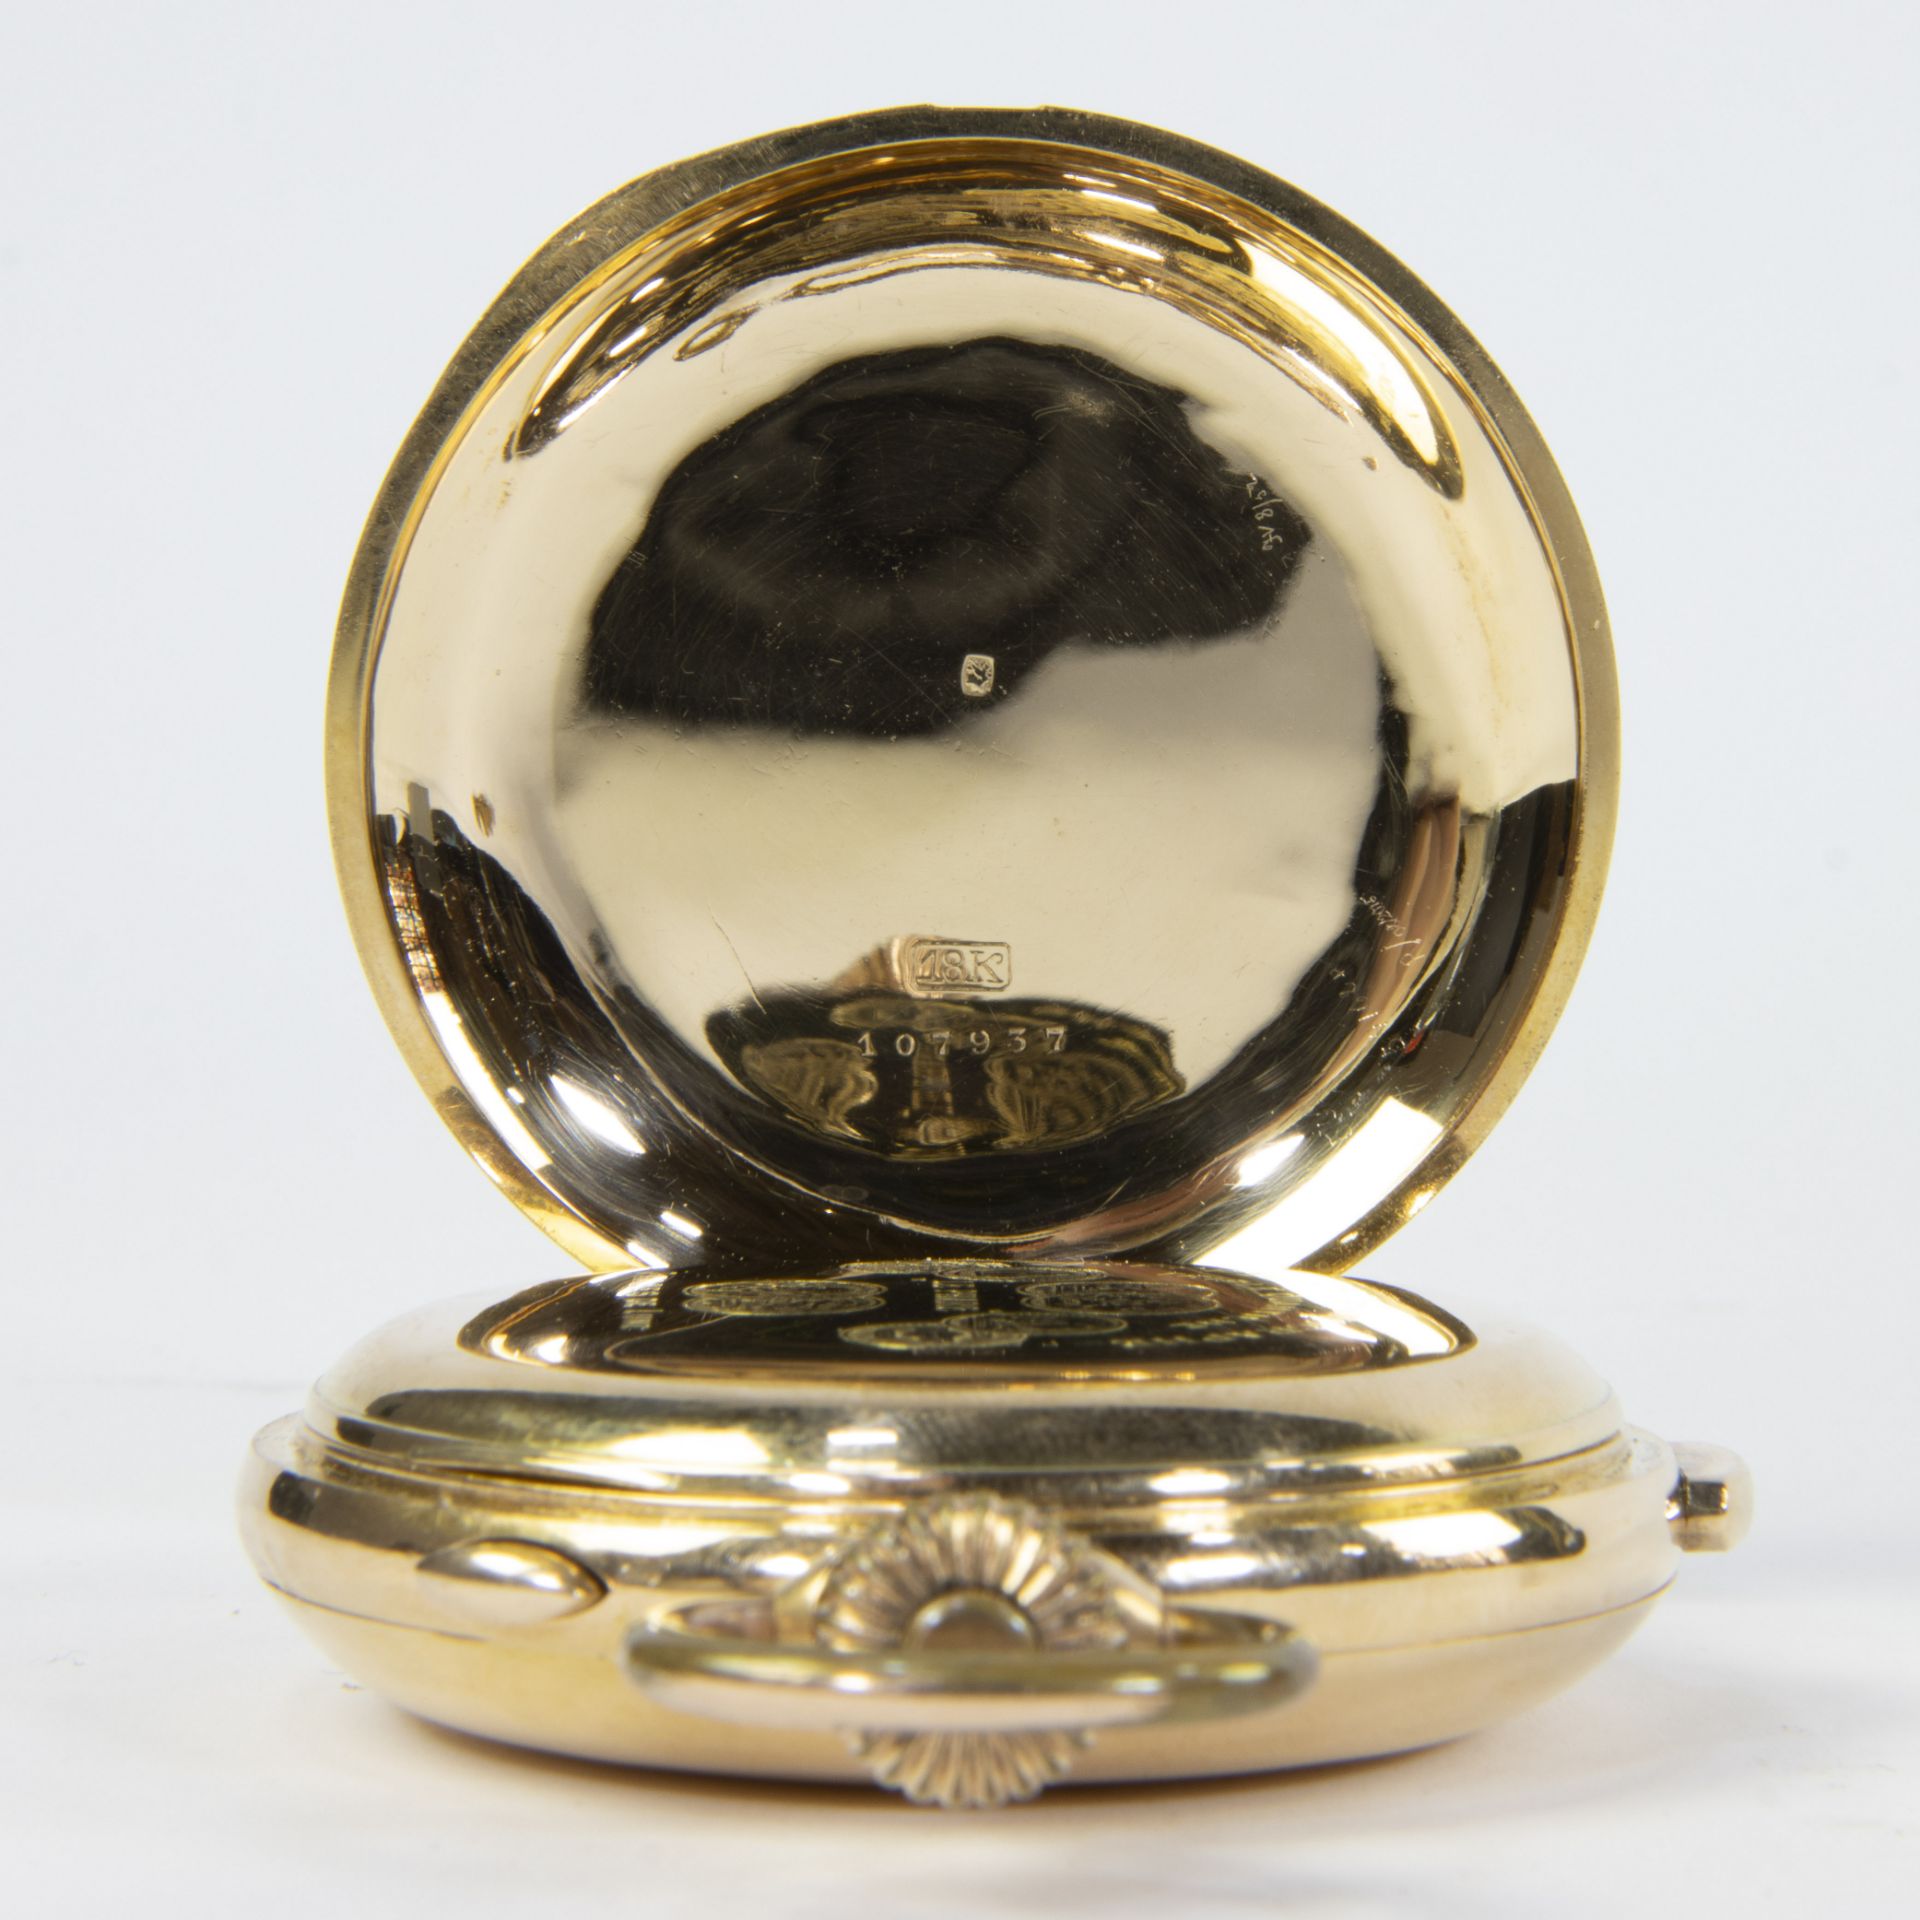 Gold pocket watch 'Le Phare' with golden chain (18 ct), 25 grams, Chronographe répétition, ca 1890 - Image 3 of 4